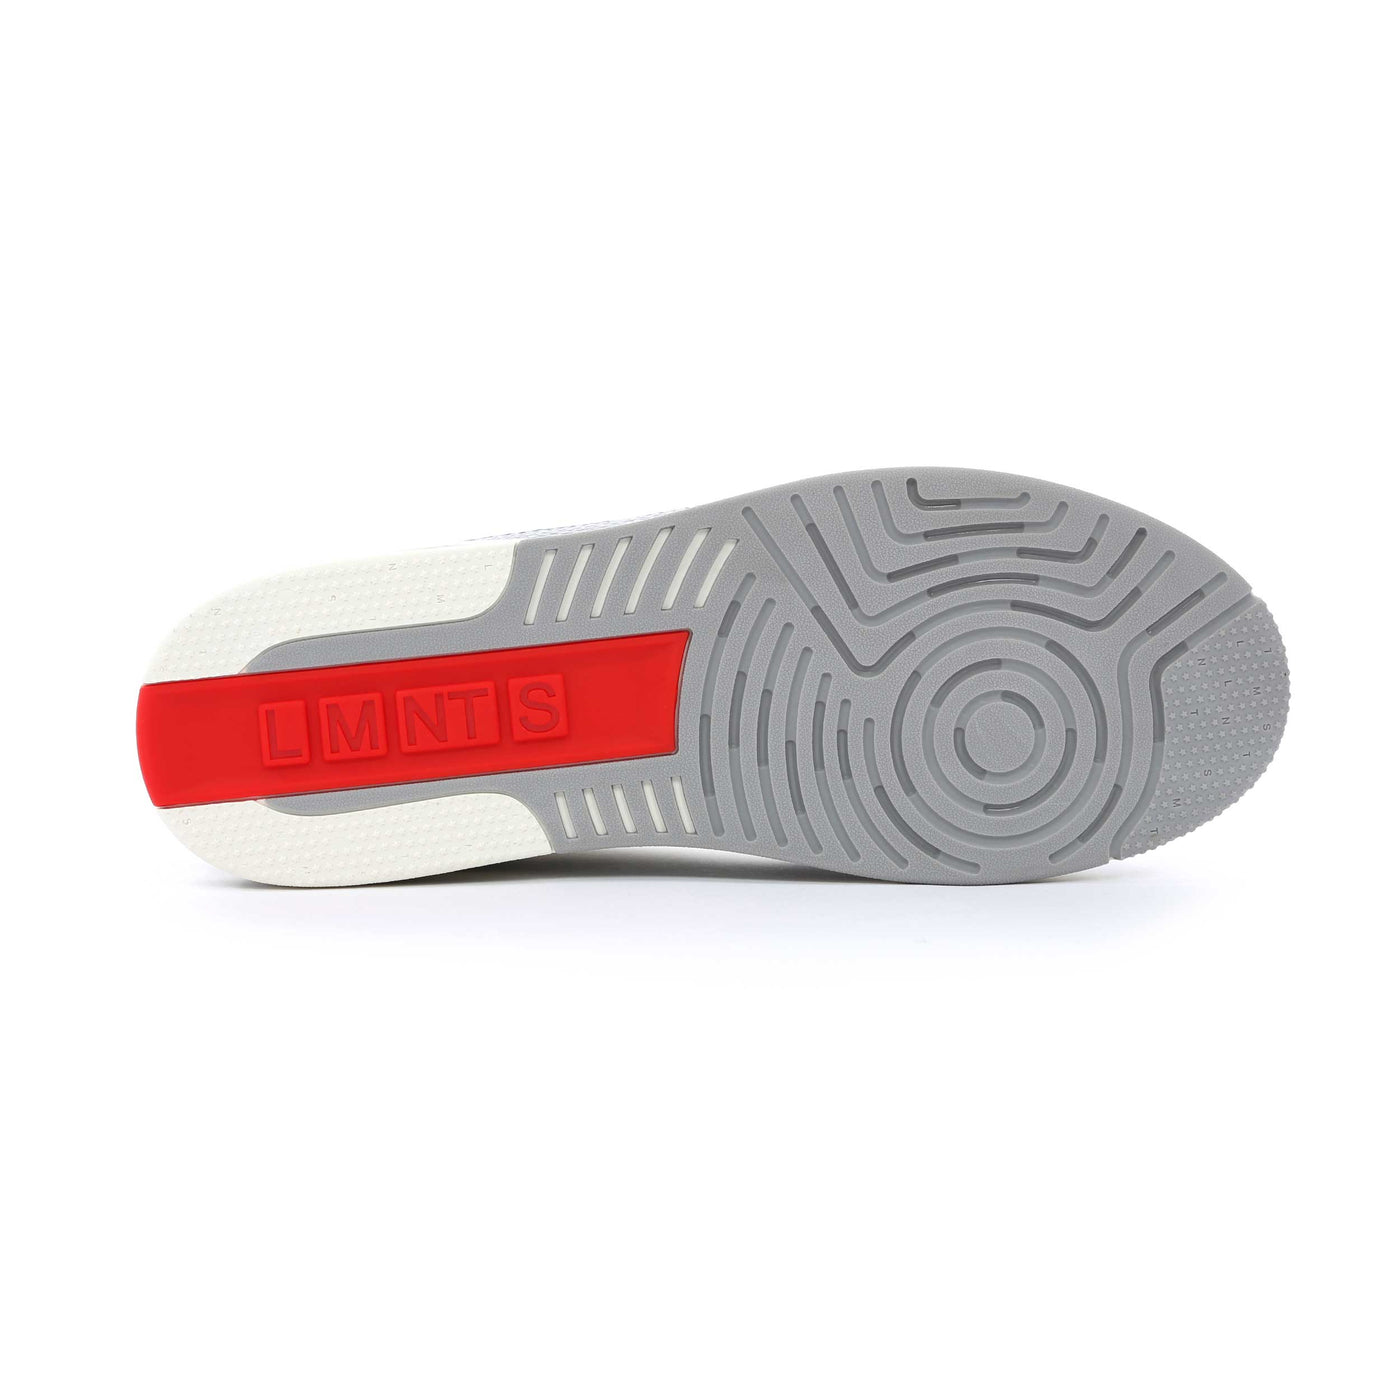 LMNTS Porter Tumbled Trainer in Grey & White Sole